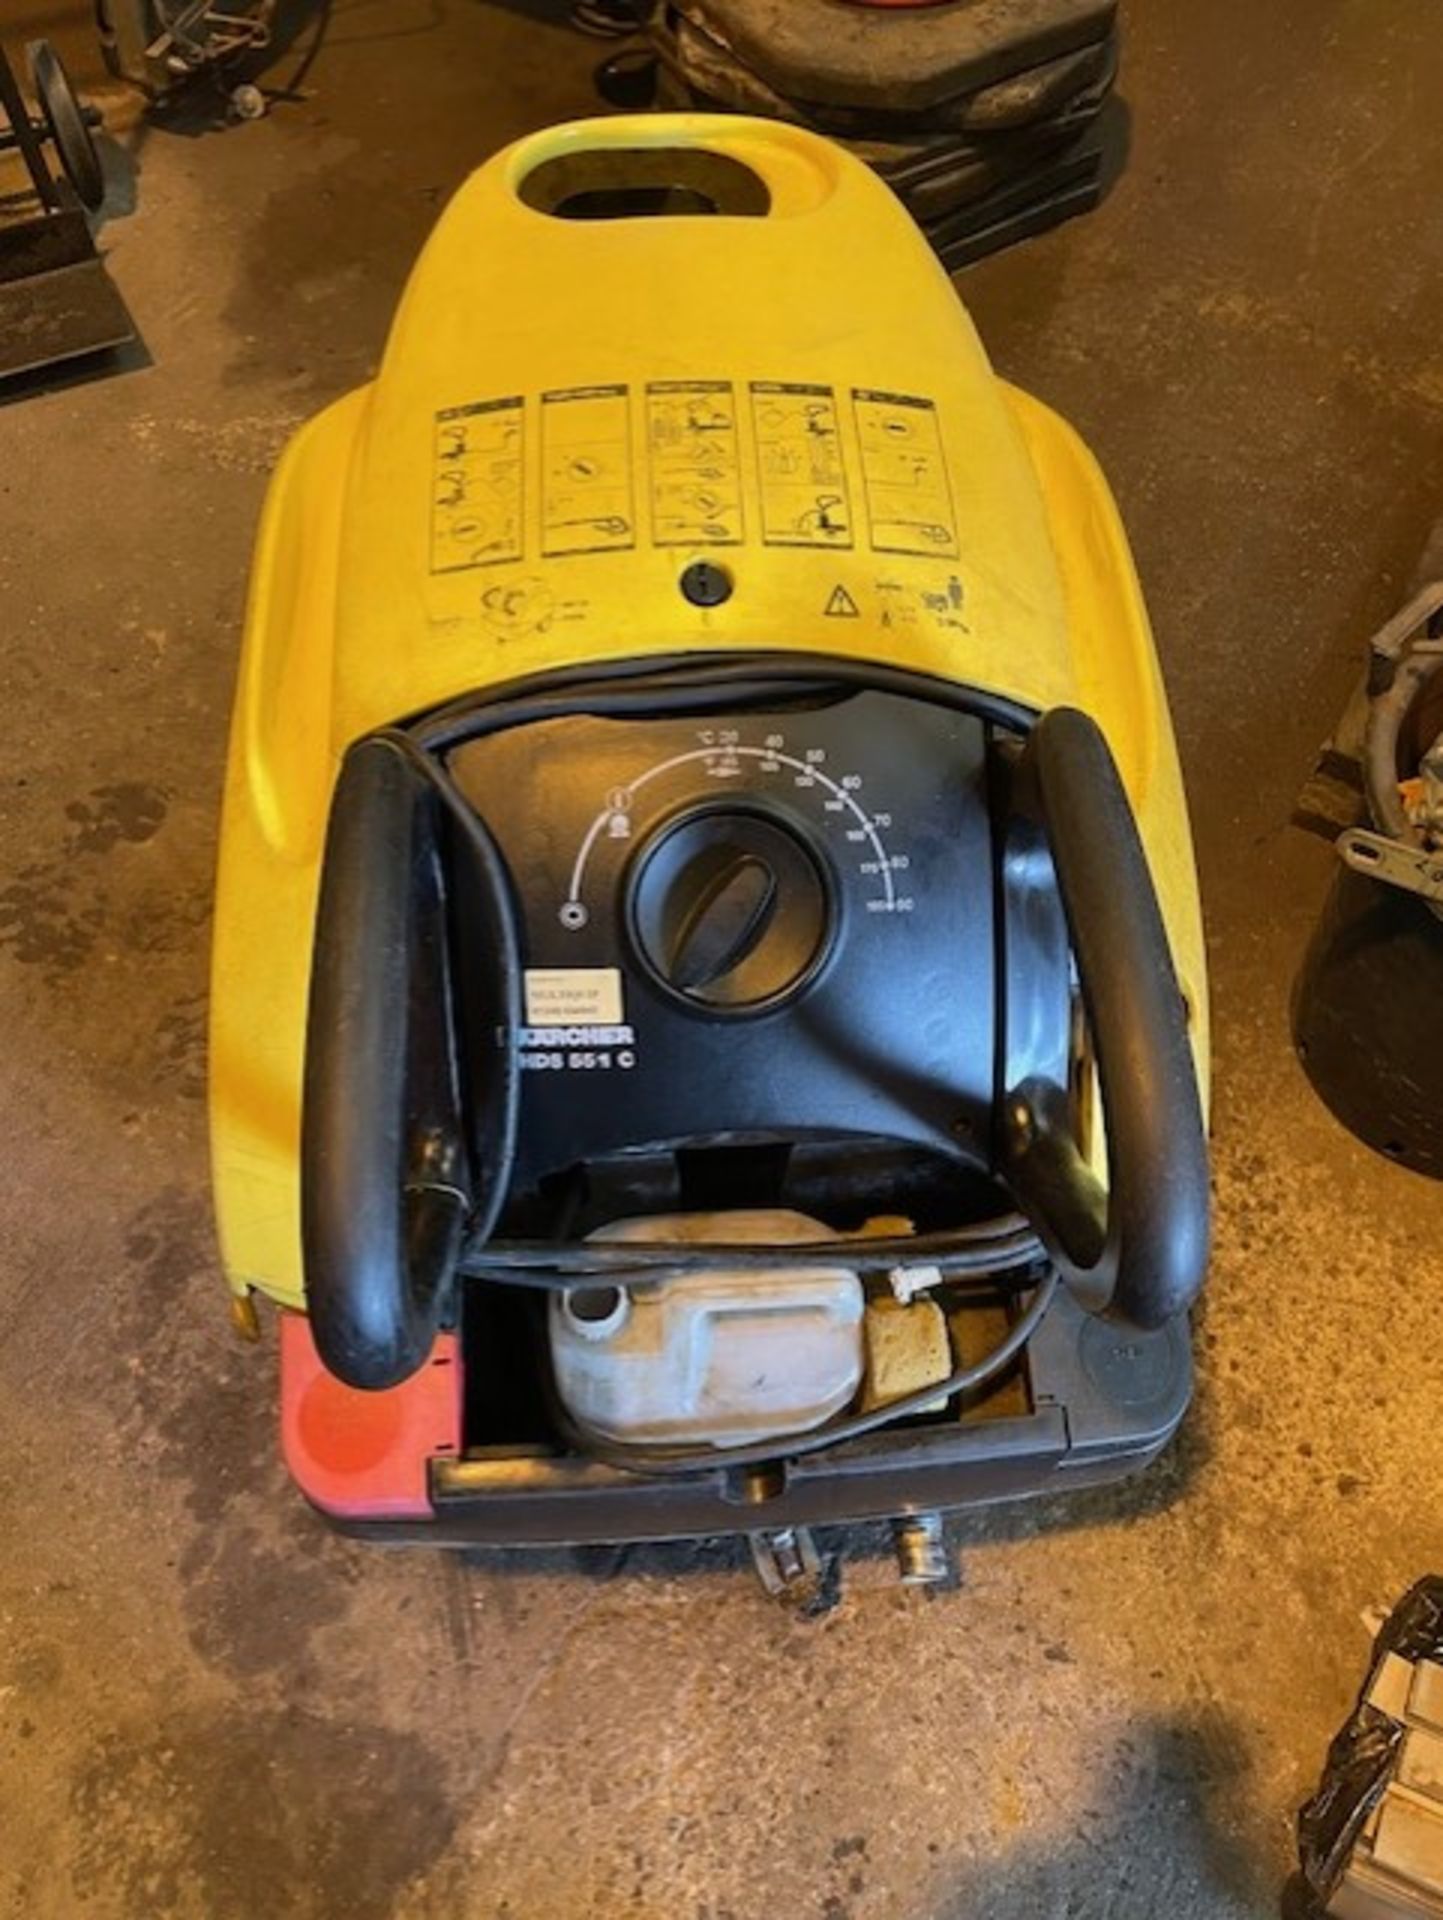 Karcher hot and cold pressure washer hds551 c model it’s in good condition still comes with hose and - Image 3 of 10